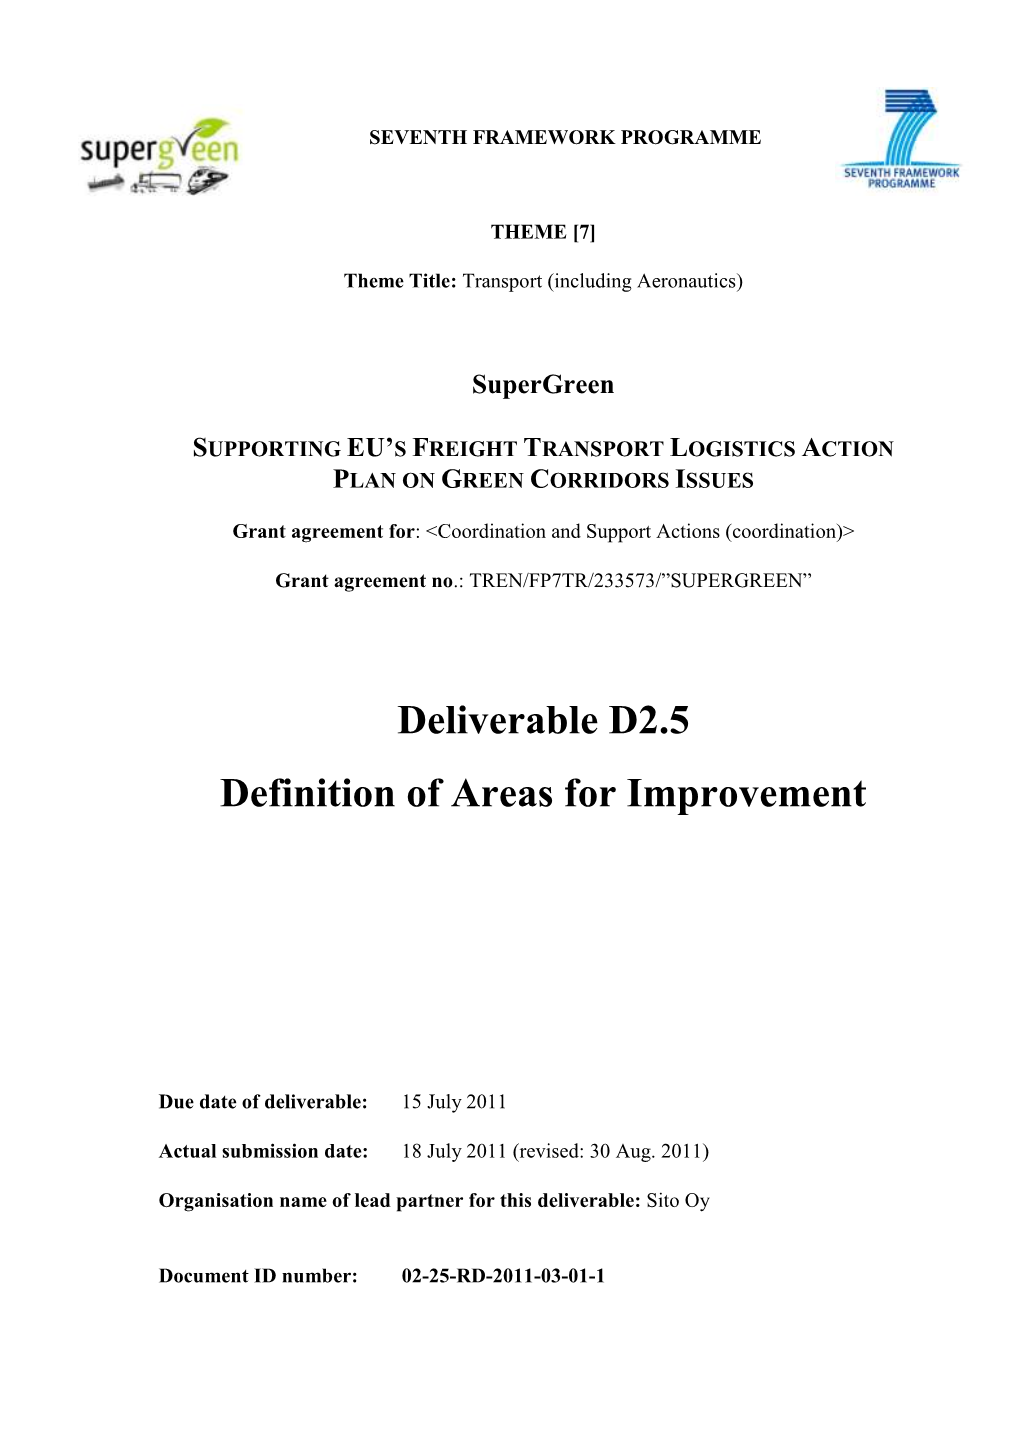 Deliverable D2.5 Definition of Areas for Improvement